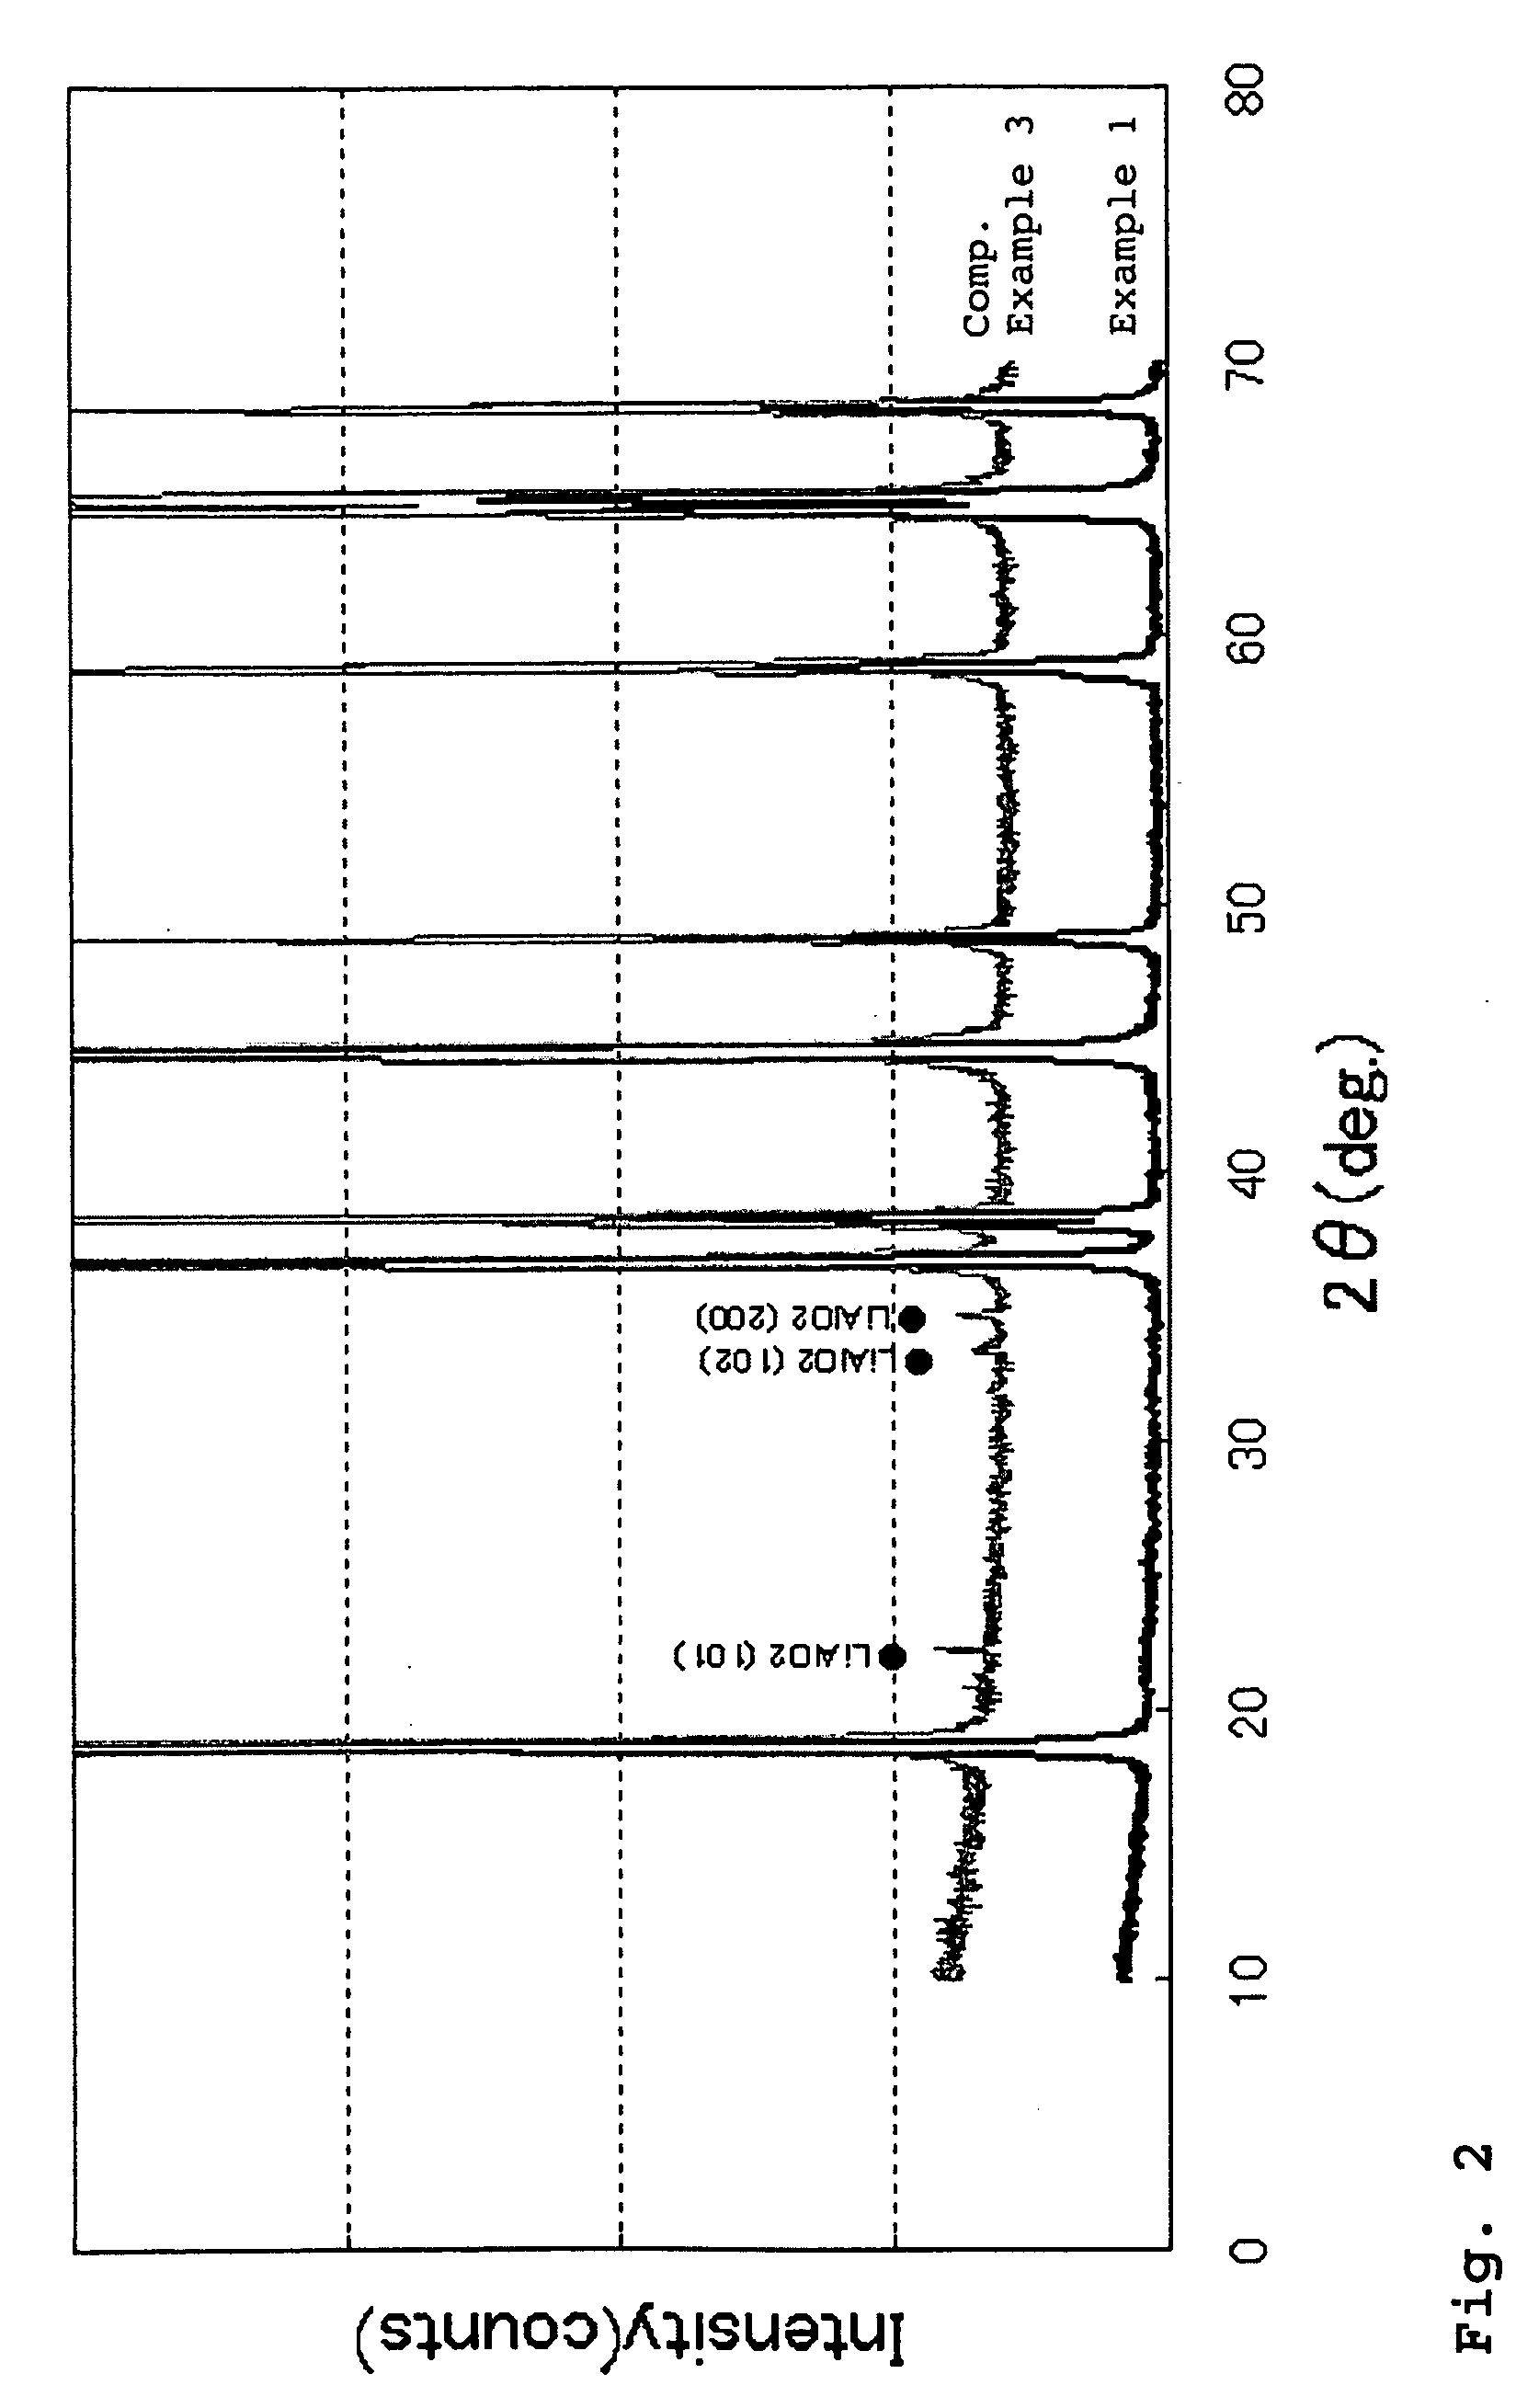 Li-Ni COMPOSITE OXIDE PARTICLES FOR NON-AQUEOUS ELECTROLYTE SECONDARY CELL, PROCESS FOR PRODUCING THE SAME, AND NON-AQUEOUS ELECTROLYTE SECONDARY CELL